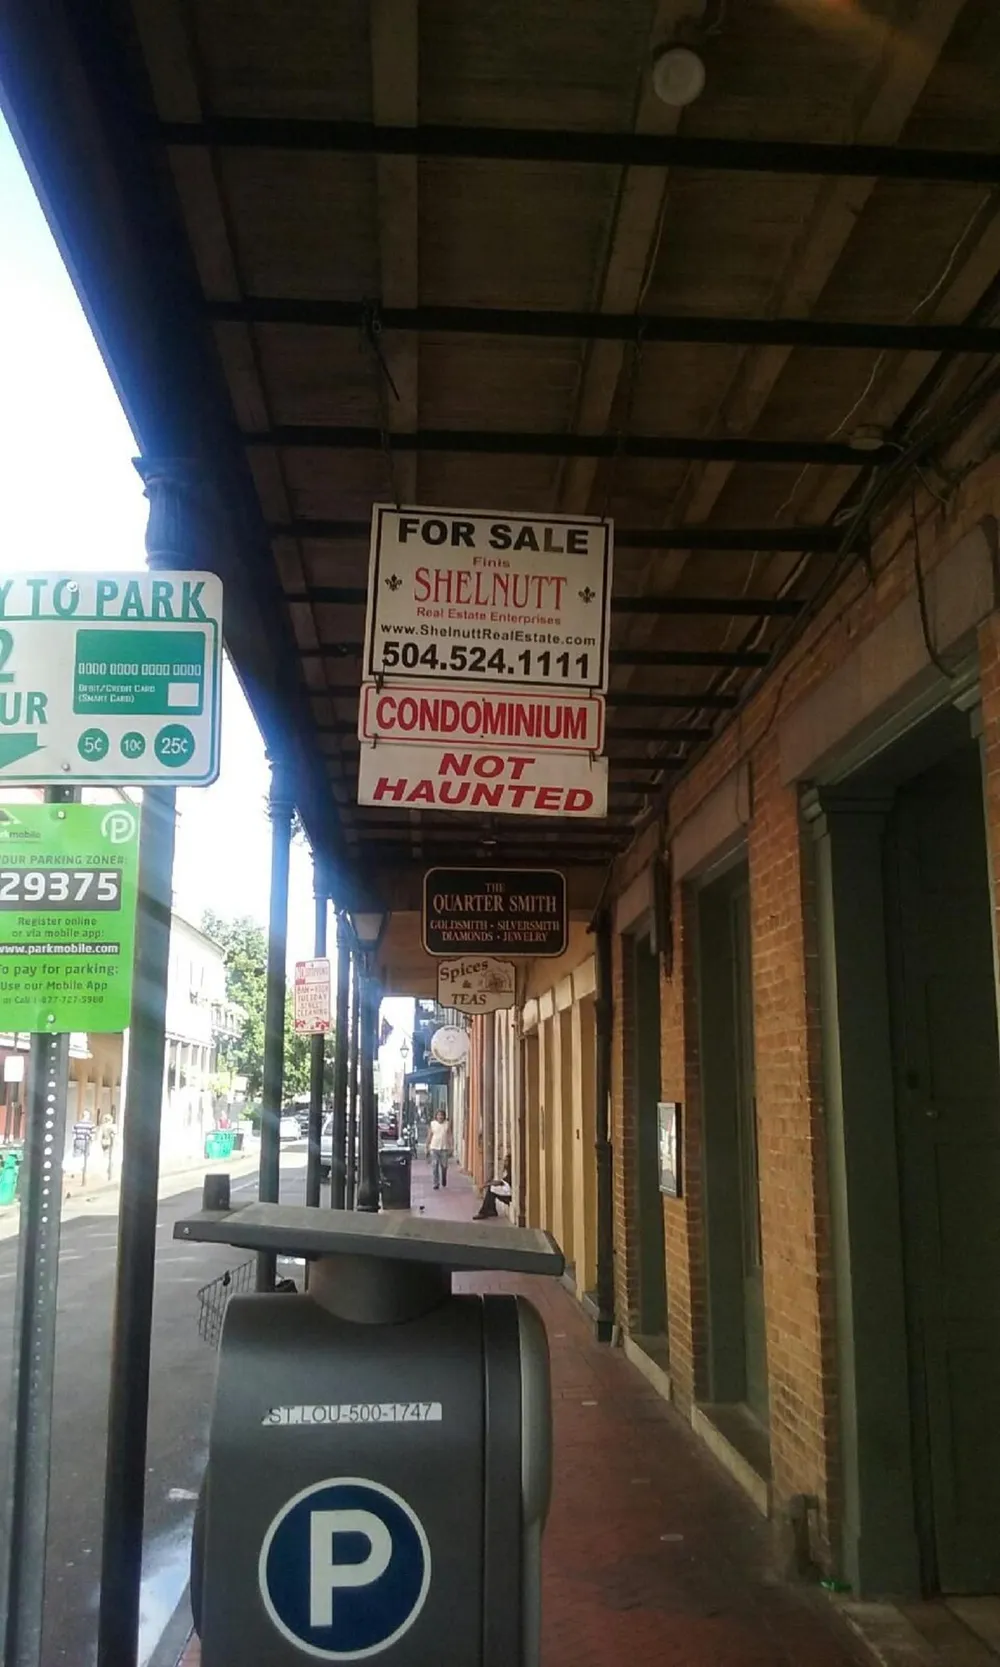 The image shows an urban street scene with a For Sale sign for a condominium that humorously notes it is NOT HAUNTED hung above a sidewalk in what appears to be an older neighborhood